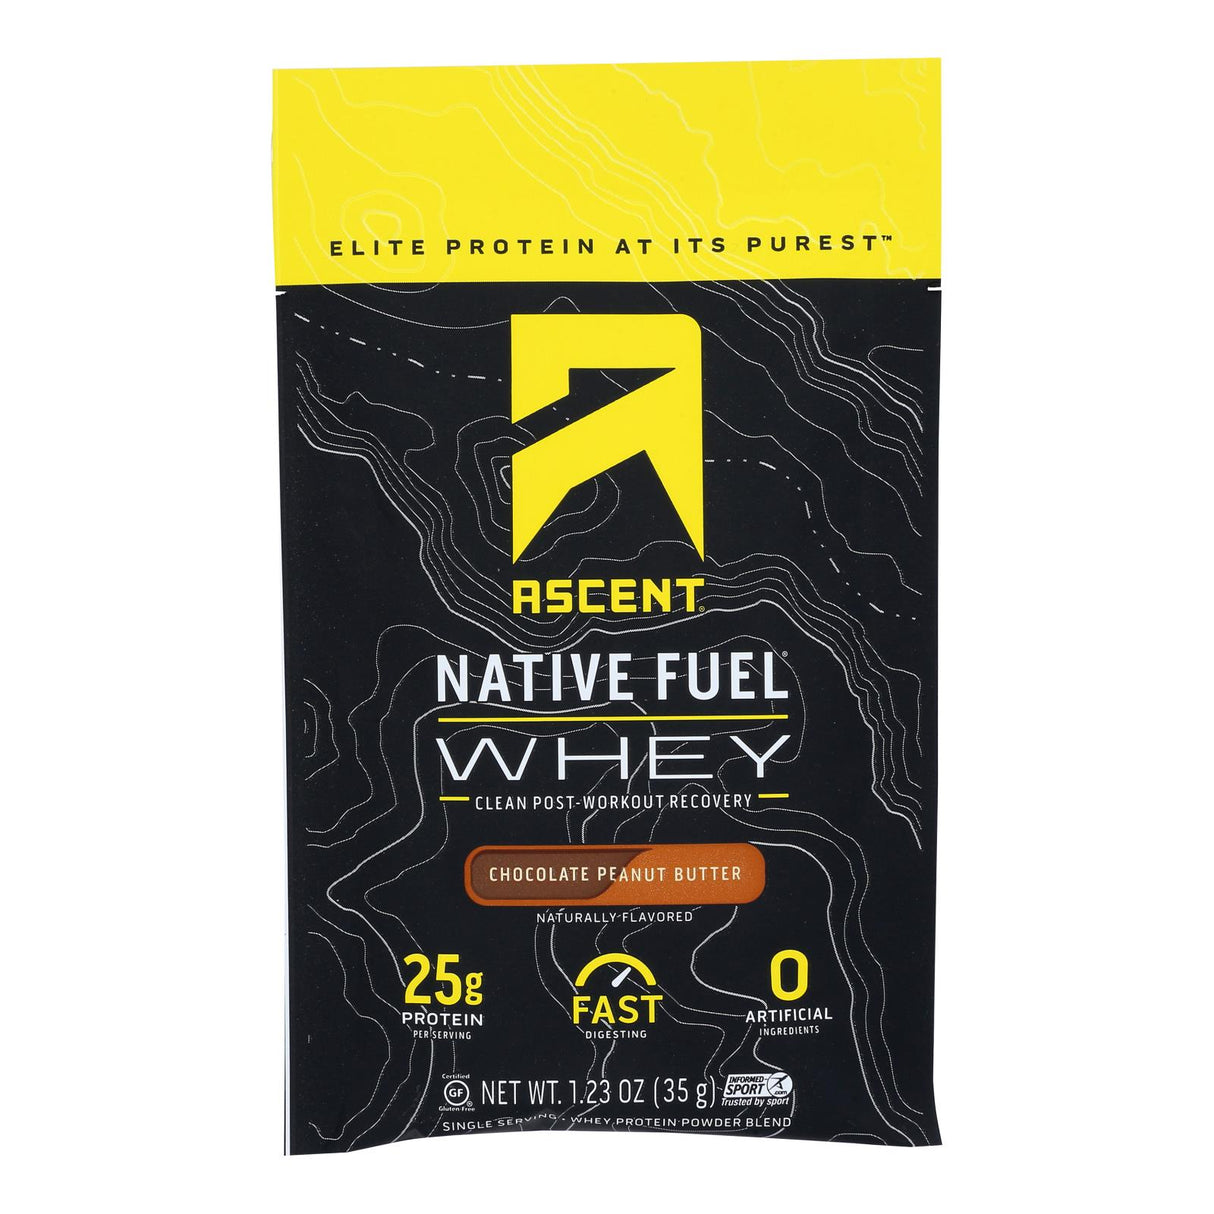 Ascent Native Fuel - Whey Chocolate Peanut Butter Sngle Packet - Case Of 15 - 1.23 Oz - Cozy Farm 